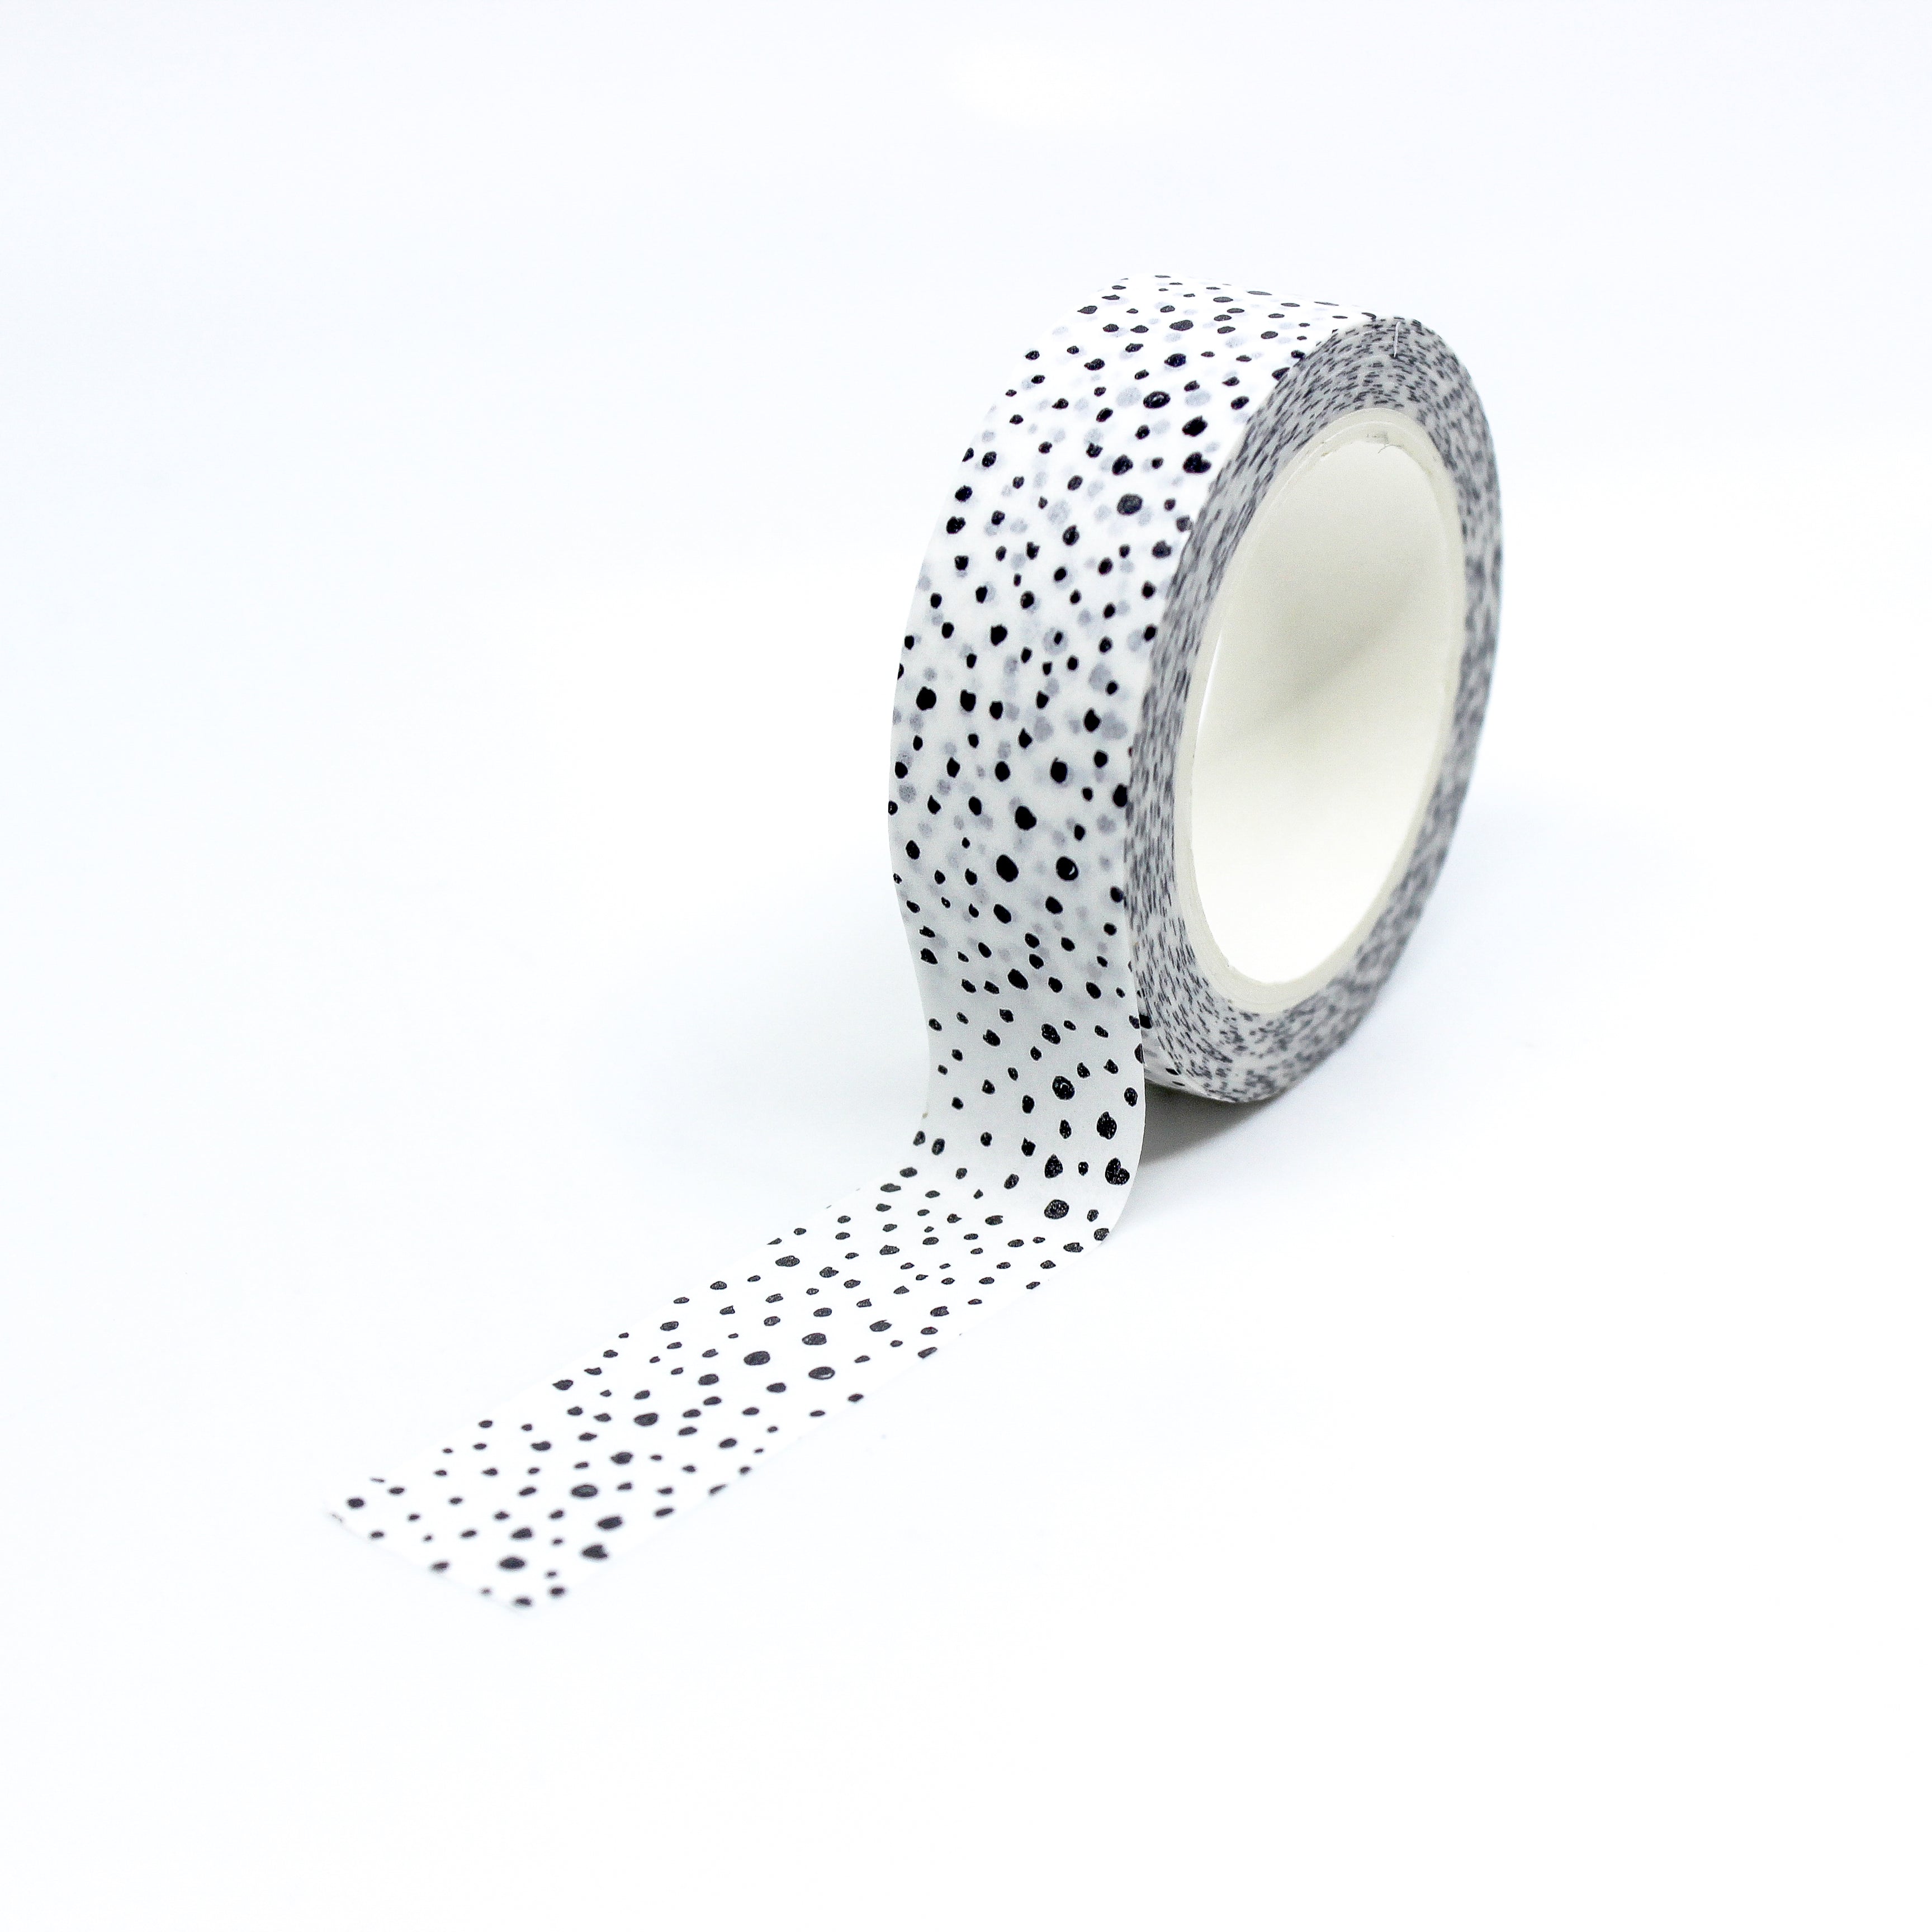 Elevate your projects with our captivating white tiny speckle washi tape, showcasing a fine pattern of small white speckles, adding a subtle texture and depth to your designs. This tape is sold at BBB Supplies Craft Shop.